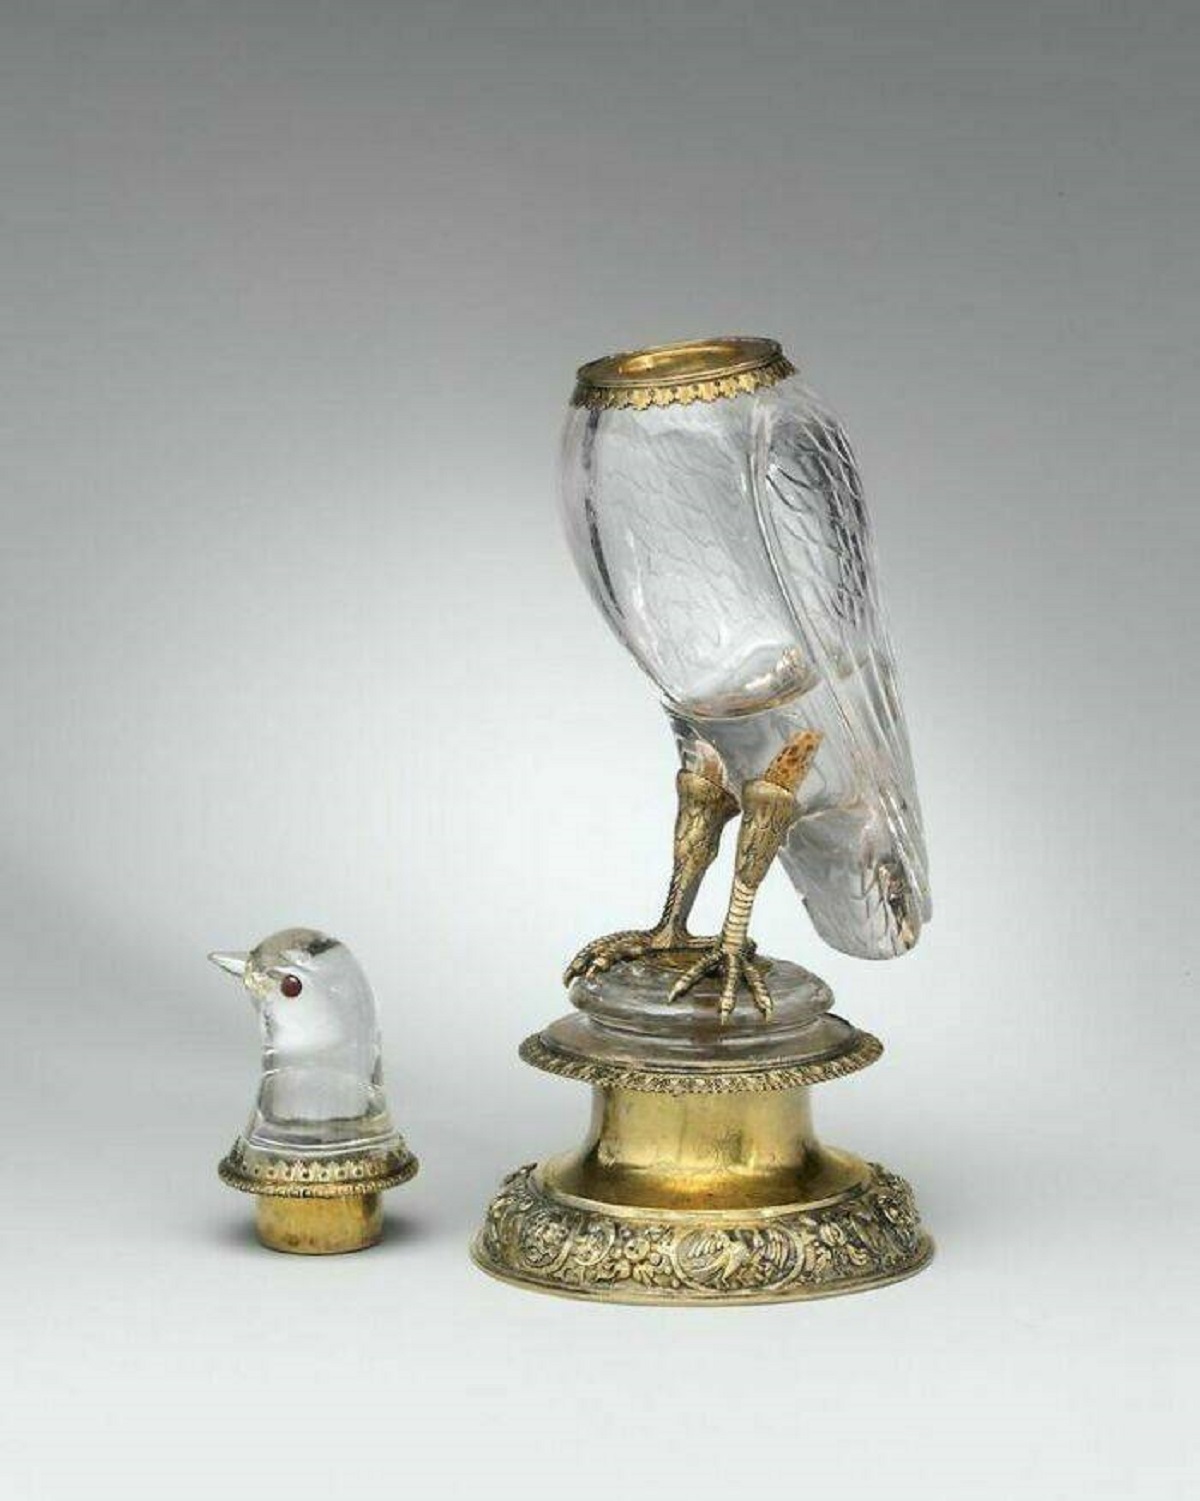 "Gilded Silver And Rock Crystal Vessel, Crafted In Nuremberg, Germany, Circa 1580"